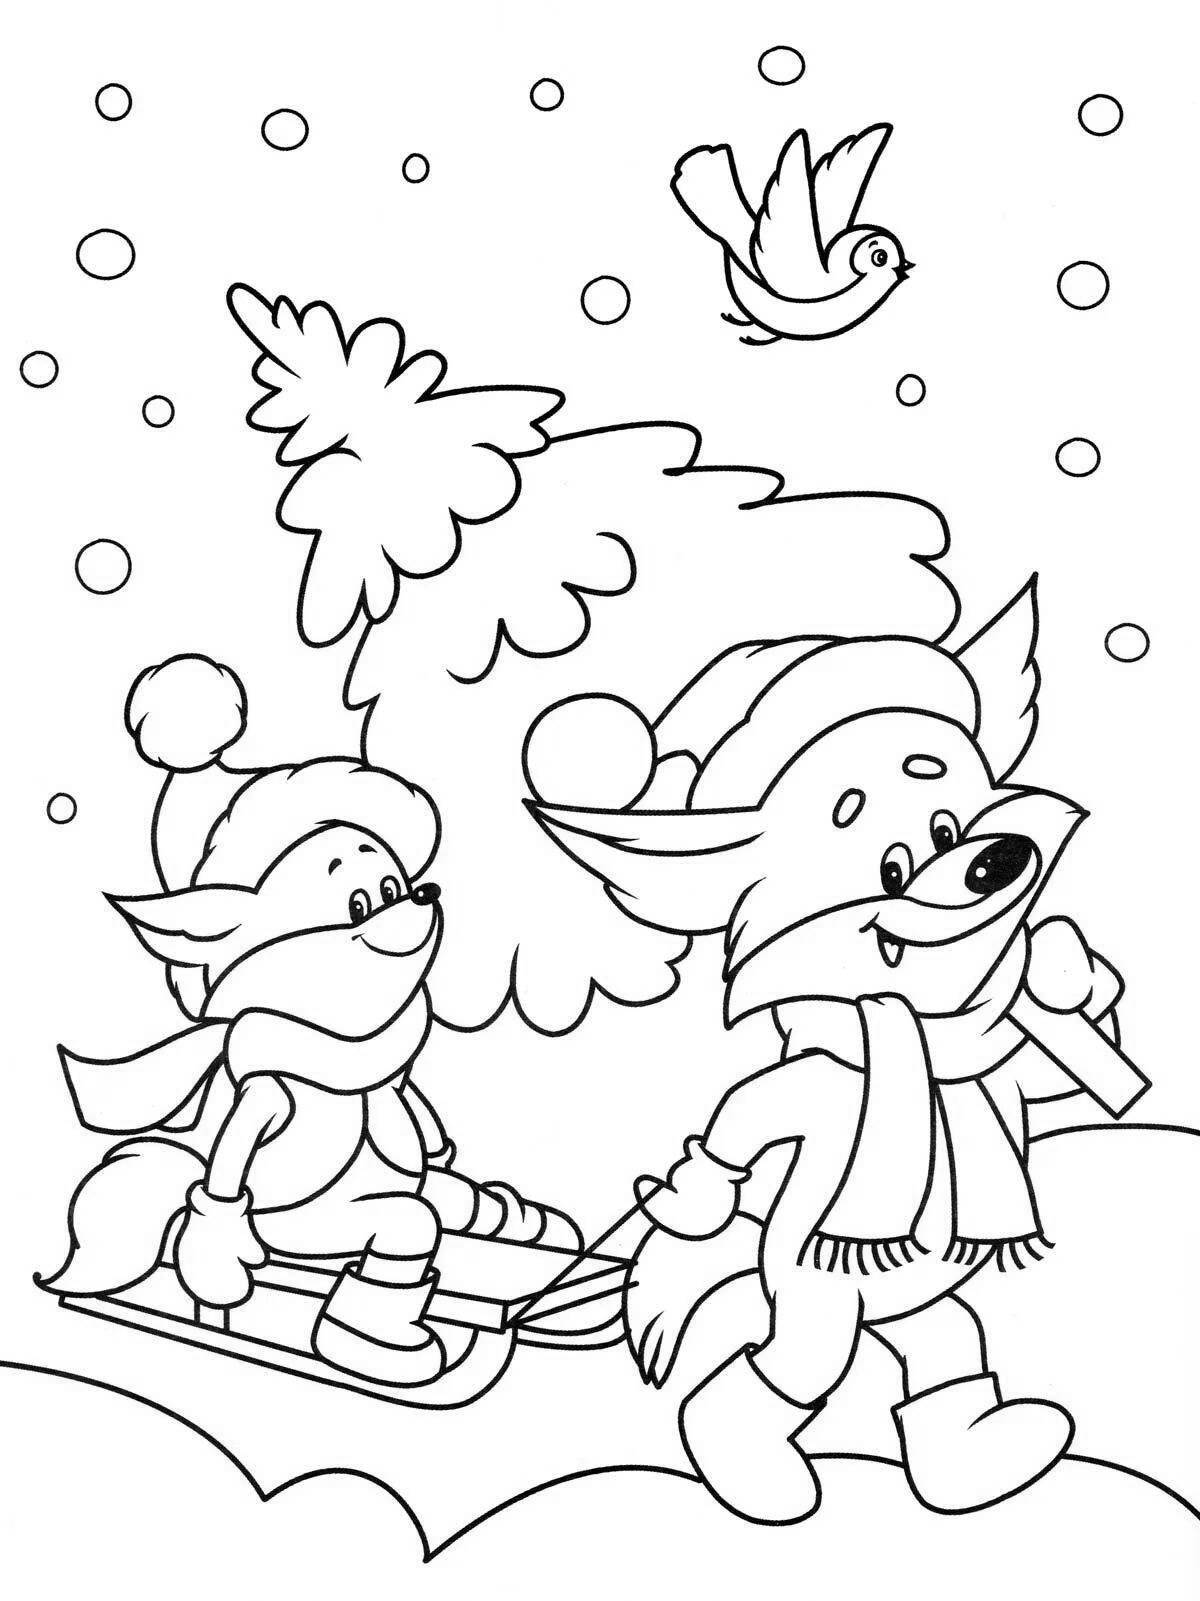 Bright winter coloring book for children 3-4 years old